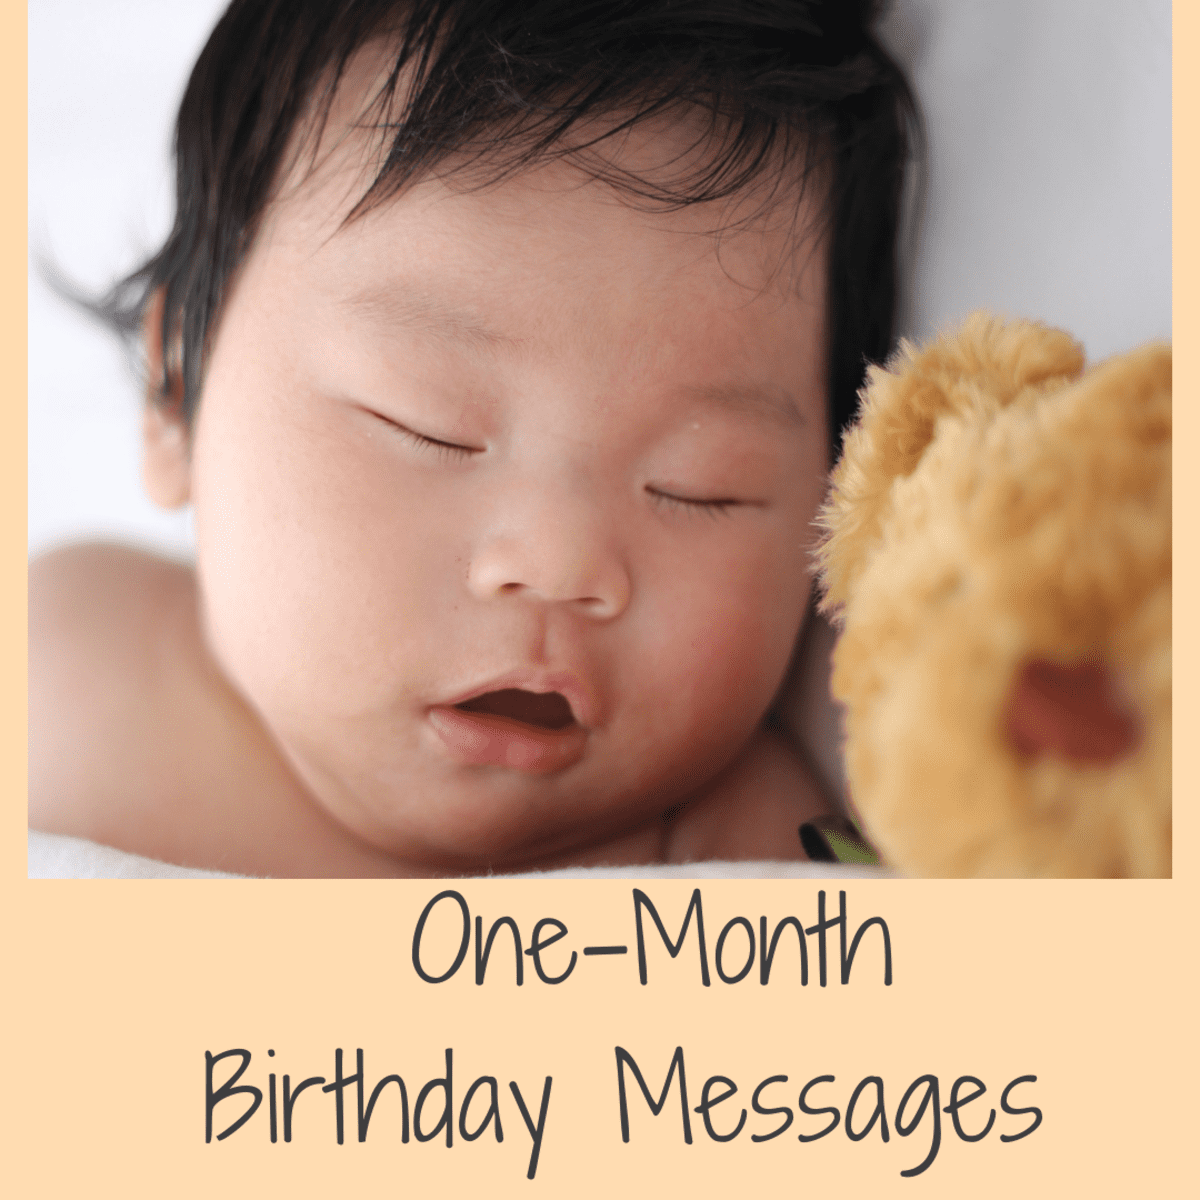 Happy Full Moon Baby Wishes: What to Write in One-Month Birthday Card -  Holidappy